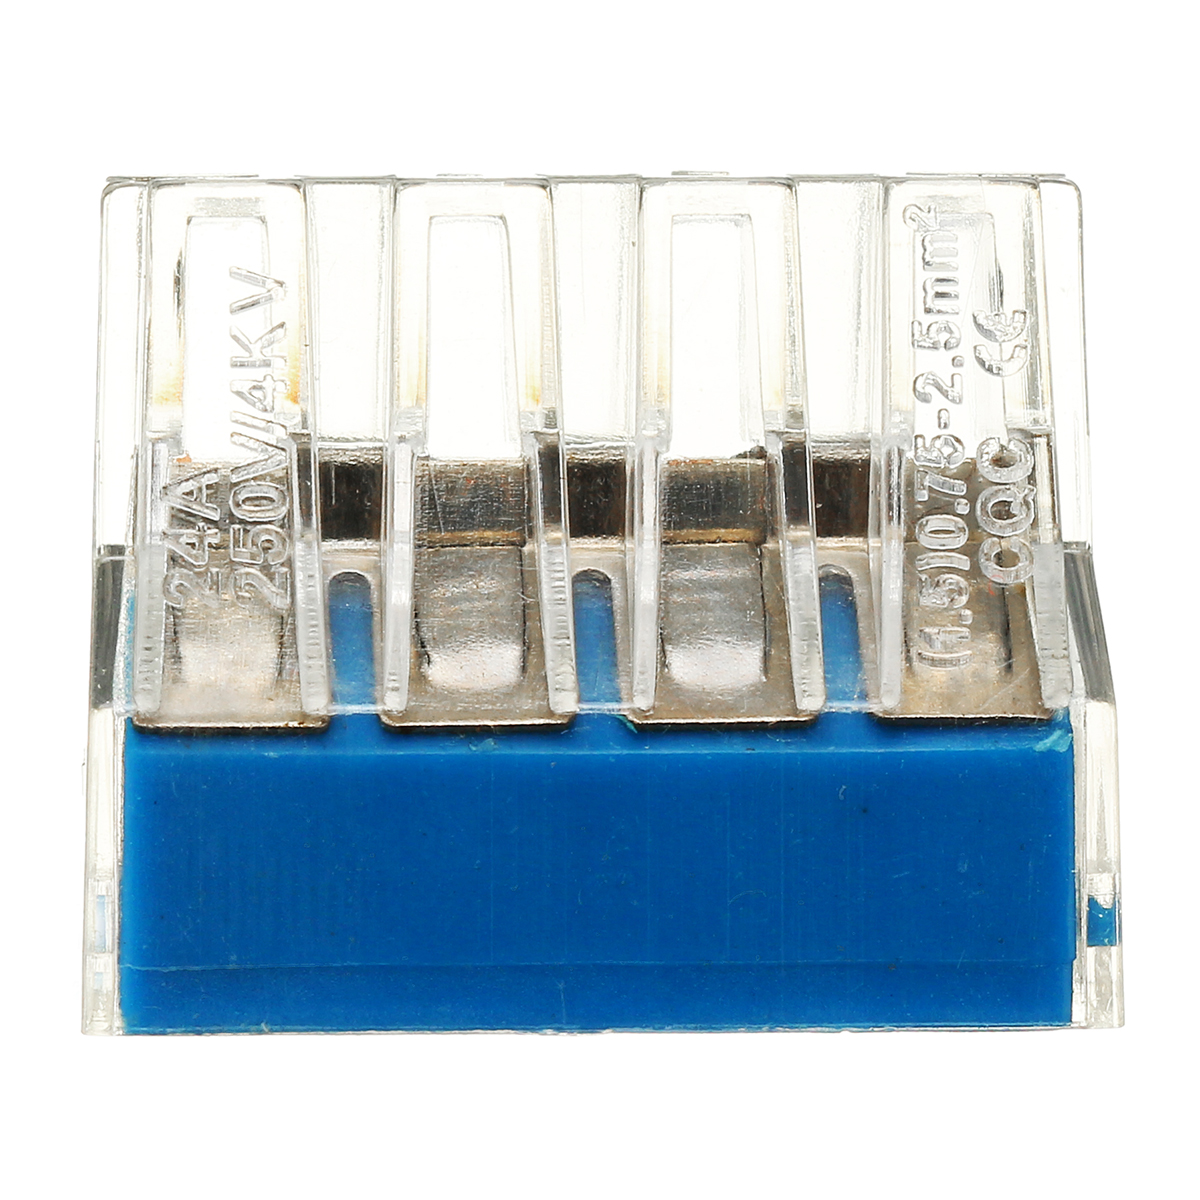 10Pcs-8-Holes-Universal-Compact-Terminal-Block-Electric-Cable-Wire-Connector-1384417-7